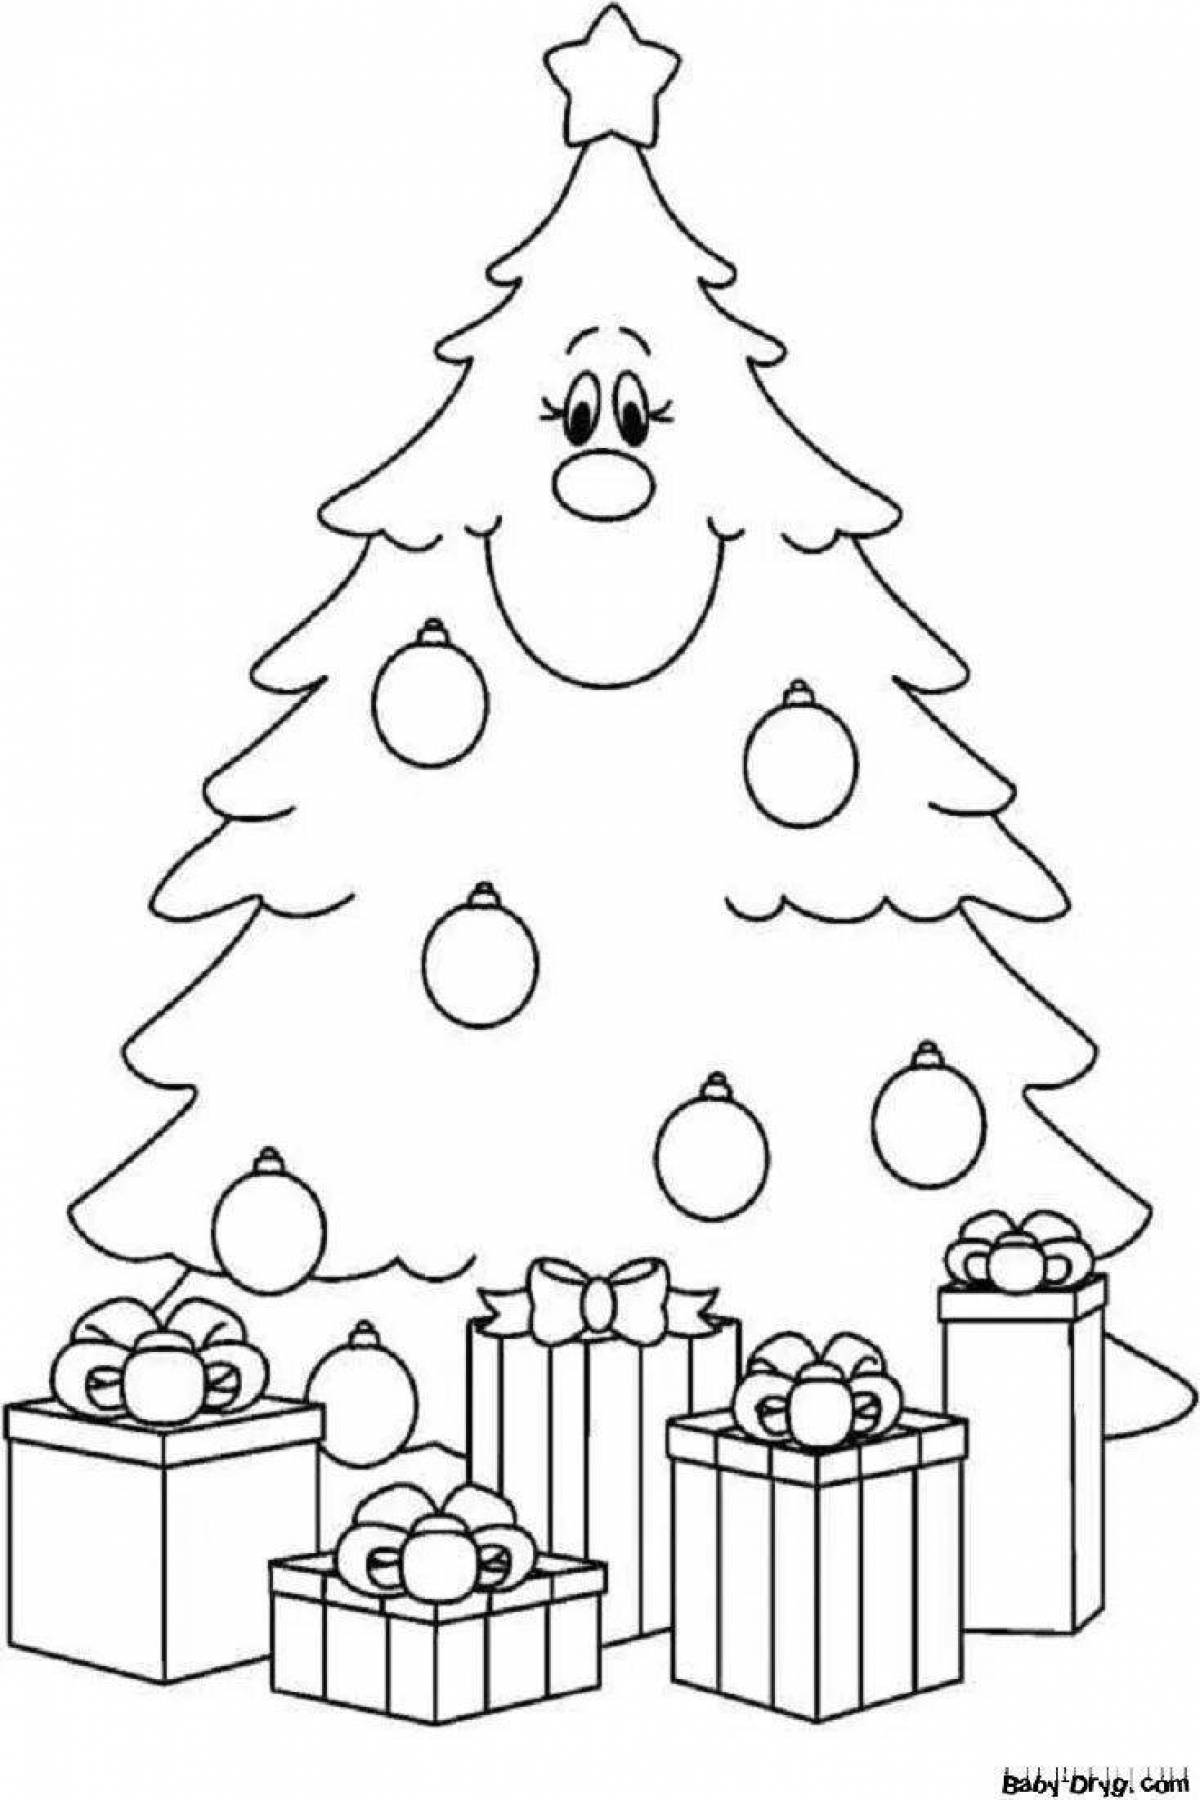 Great coloring Christmas tree with balls